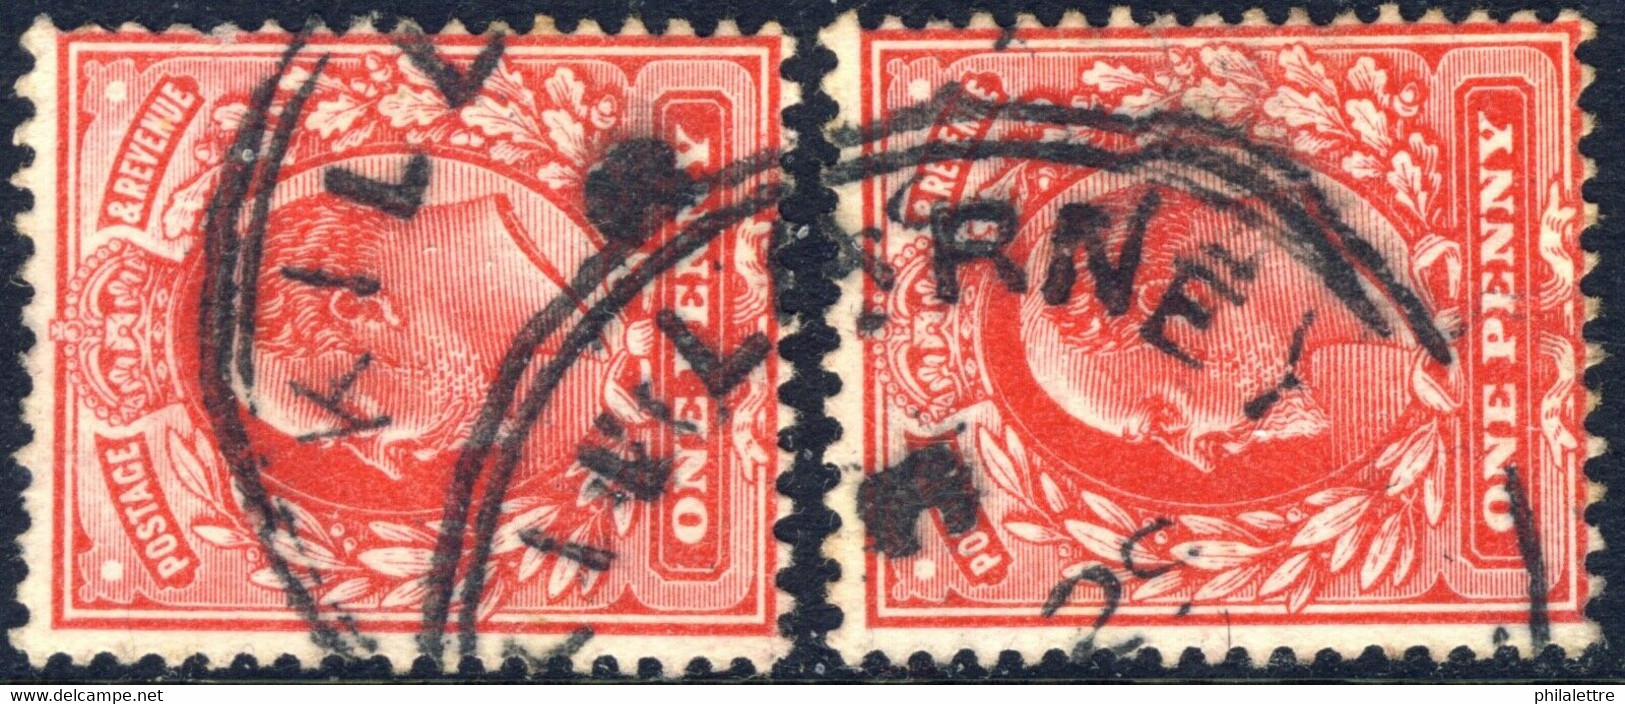 KEVII 2xSG219 1d Scarlet Used "KILLARNEY" (Co. Kerry, Ireland) Rubber CDS - Used Stamps